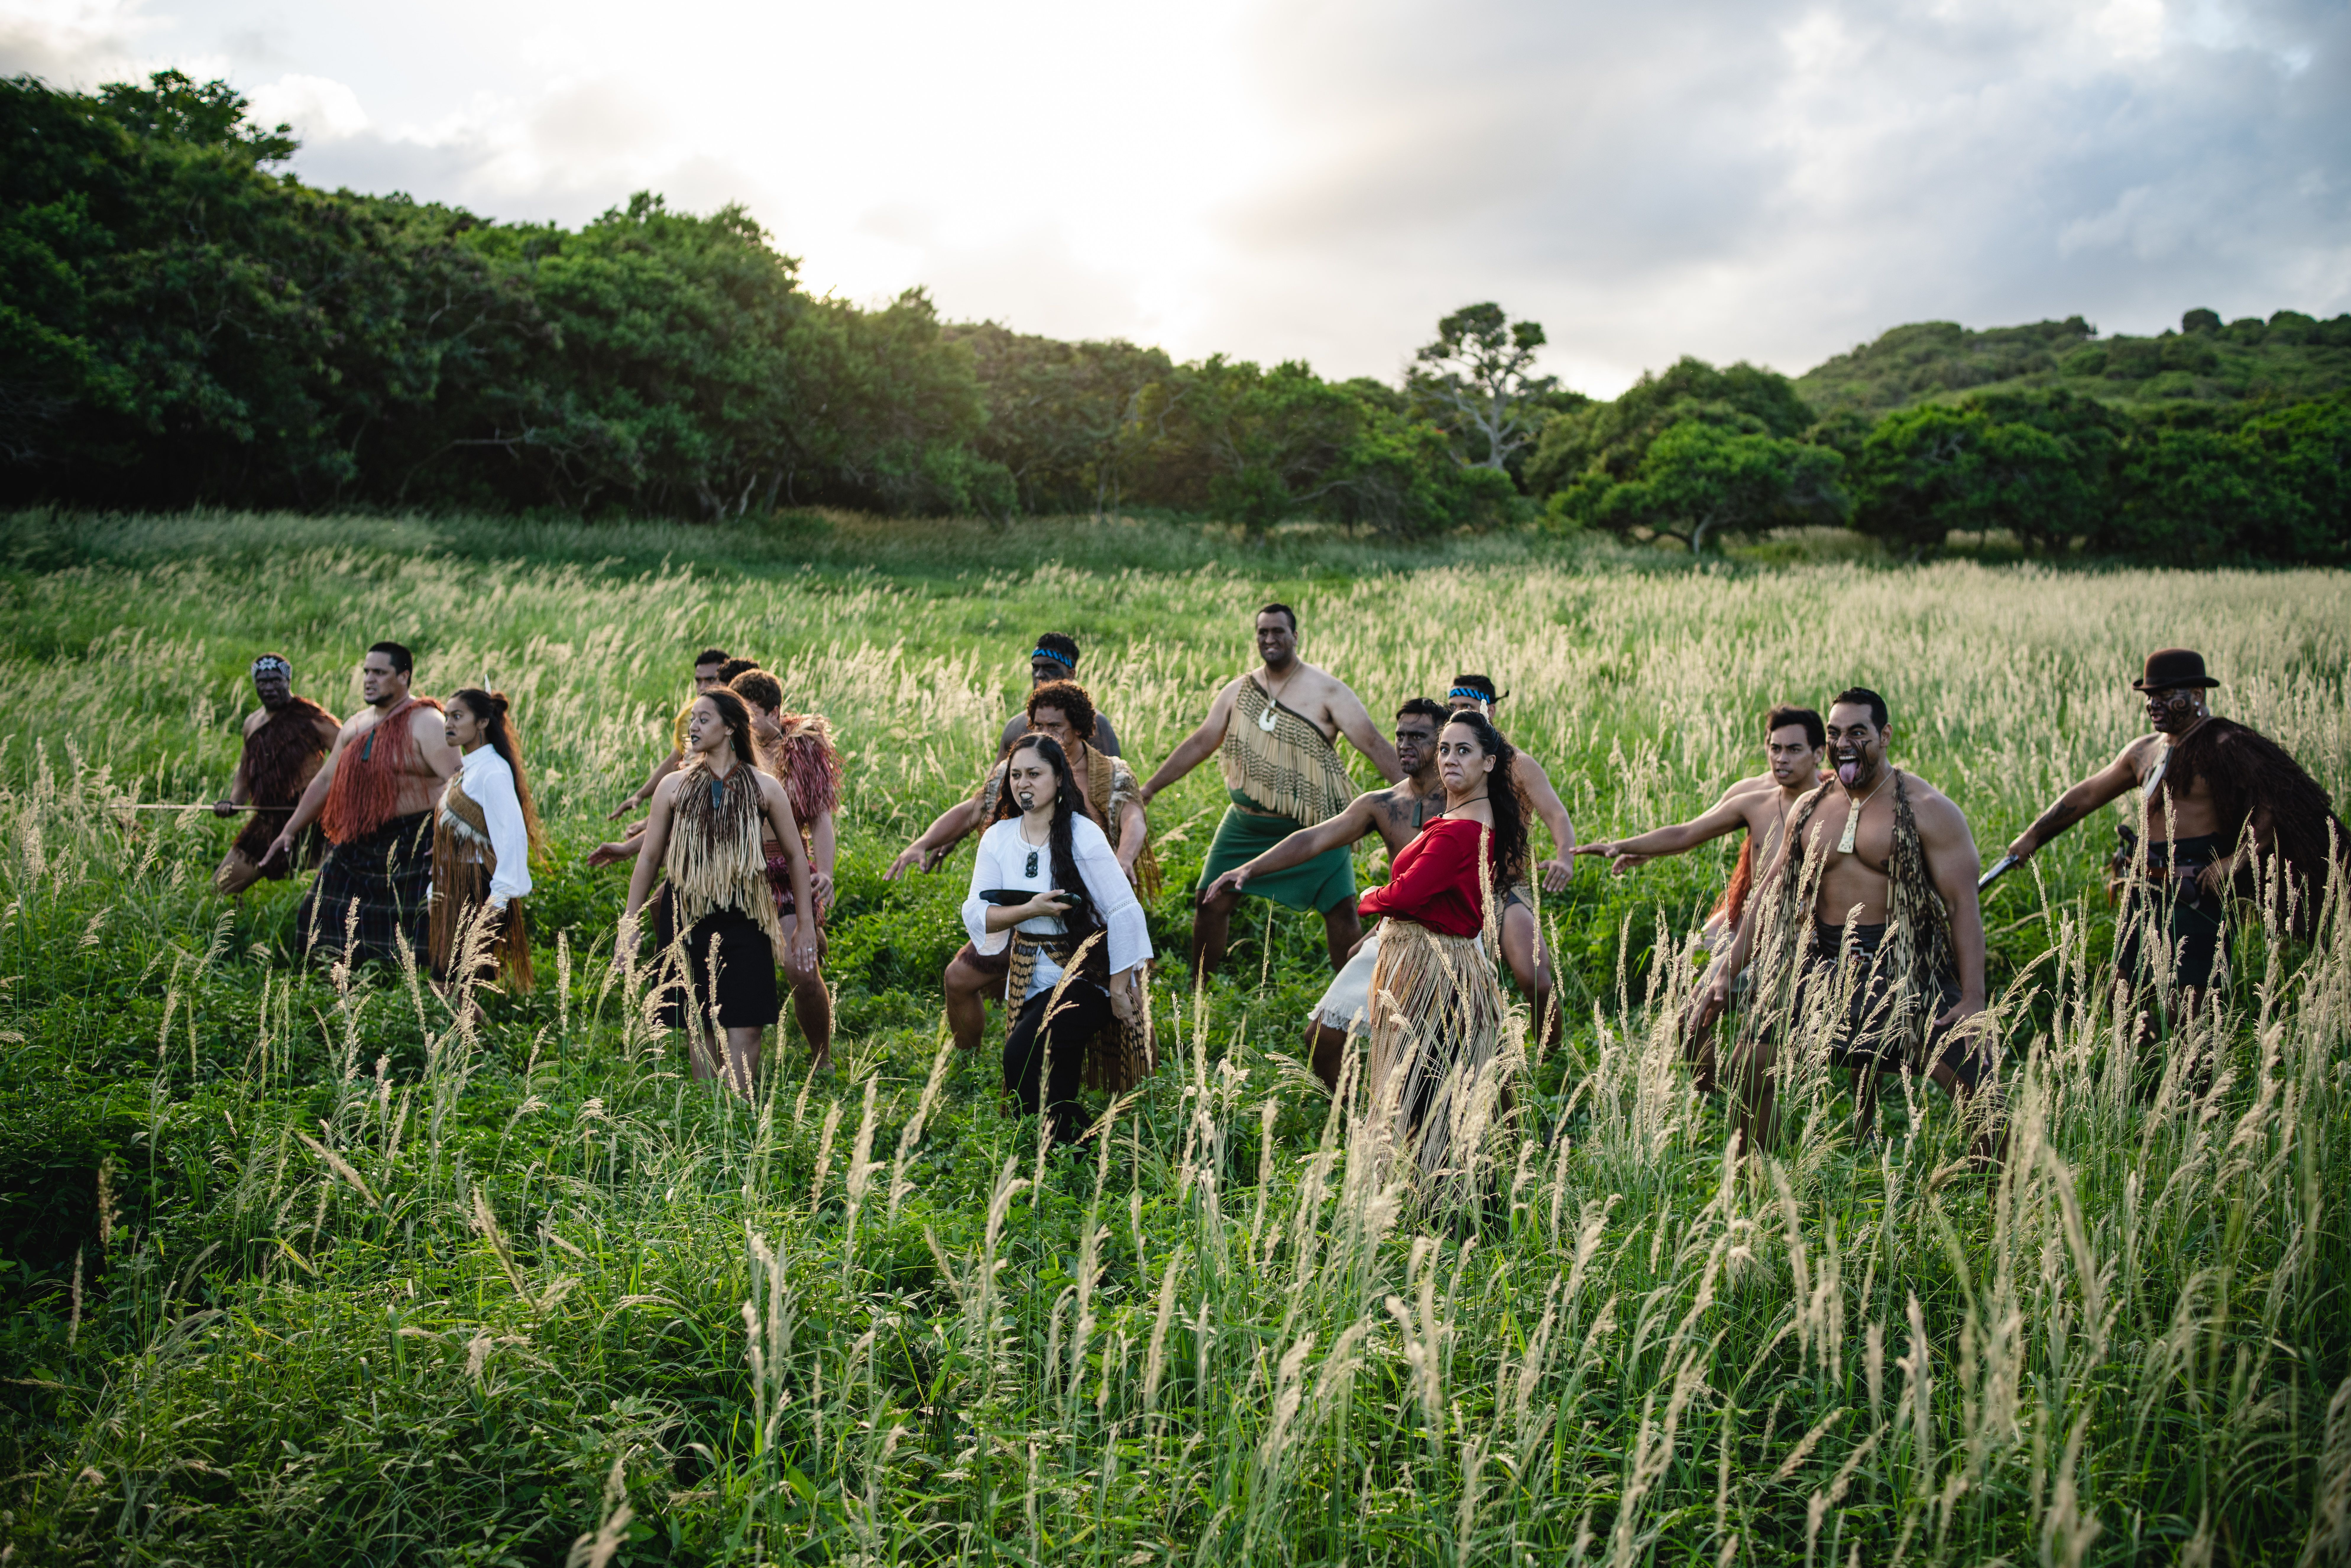 employees from the Polynesian Cultural Center perform Maori Haka in a beautifully lush and green forest landscape